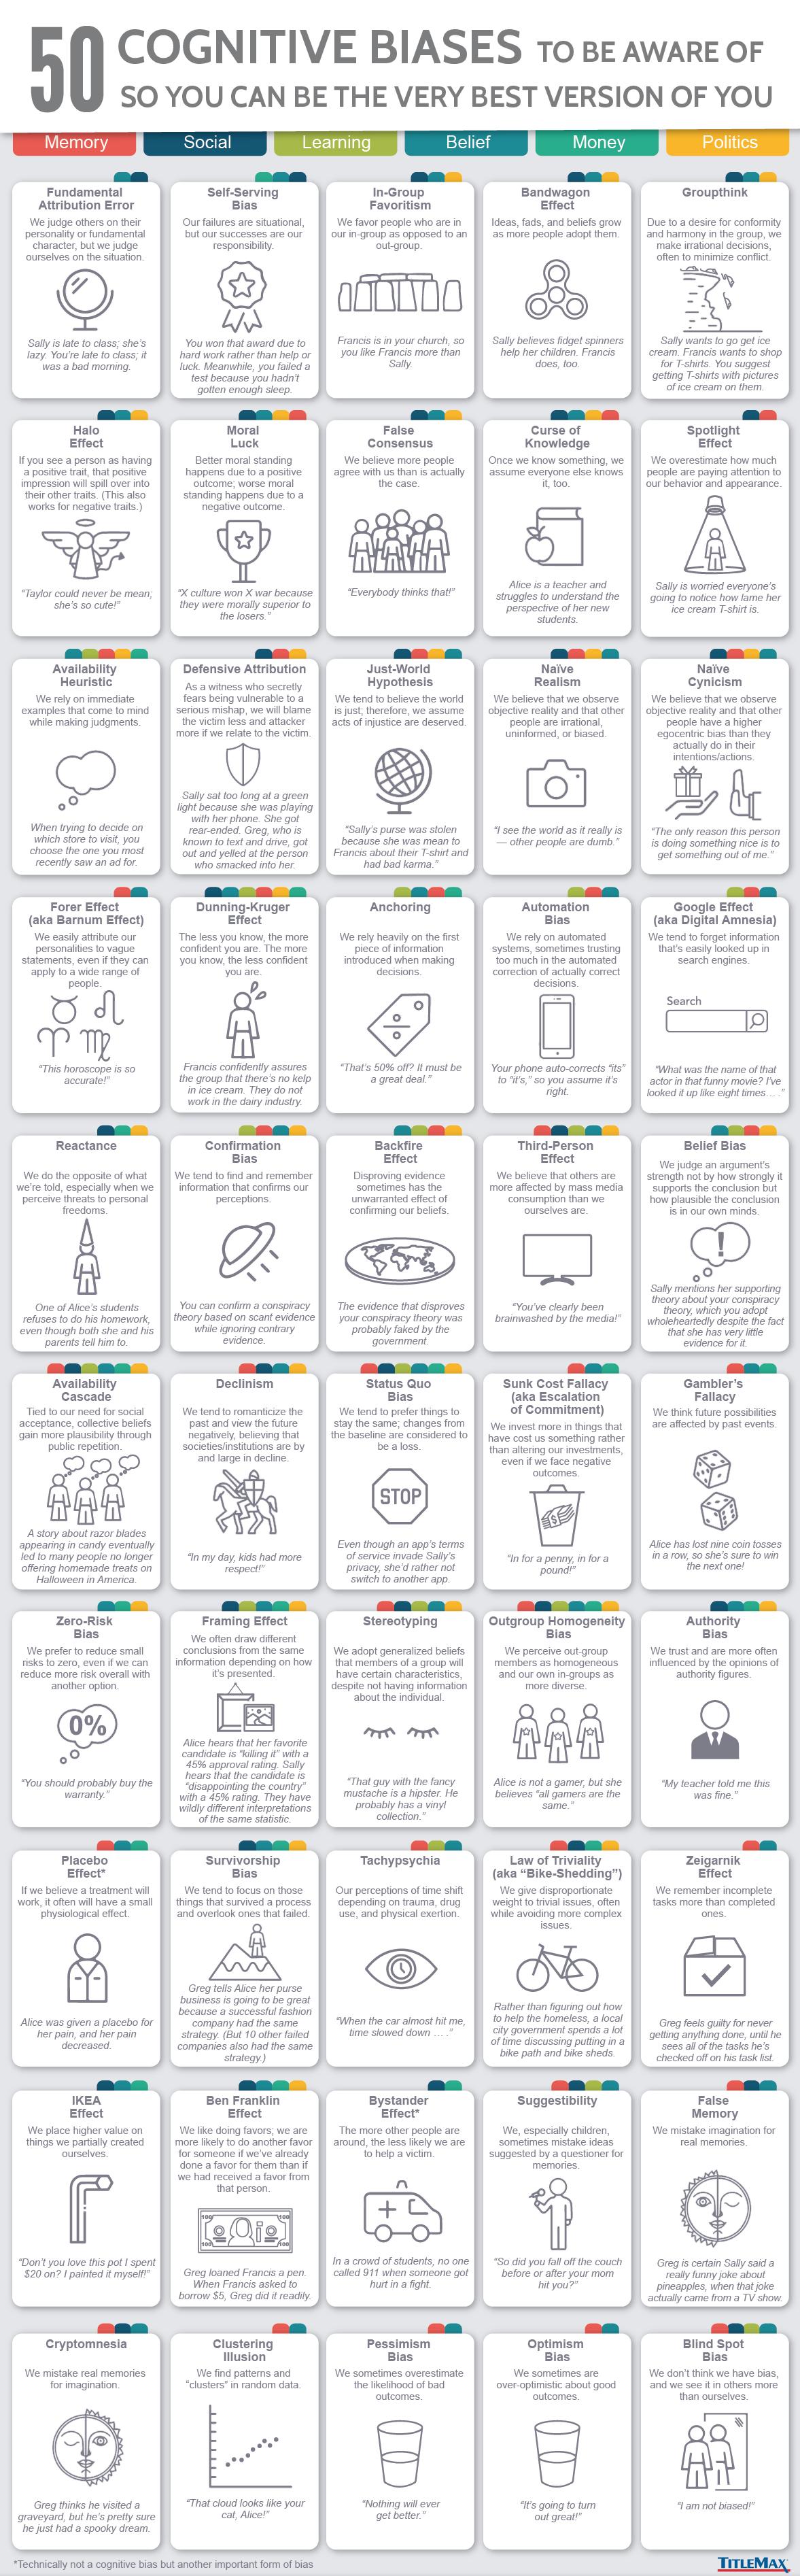 50 Cognitive Biases in the Modern World